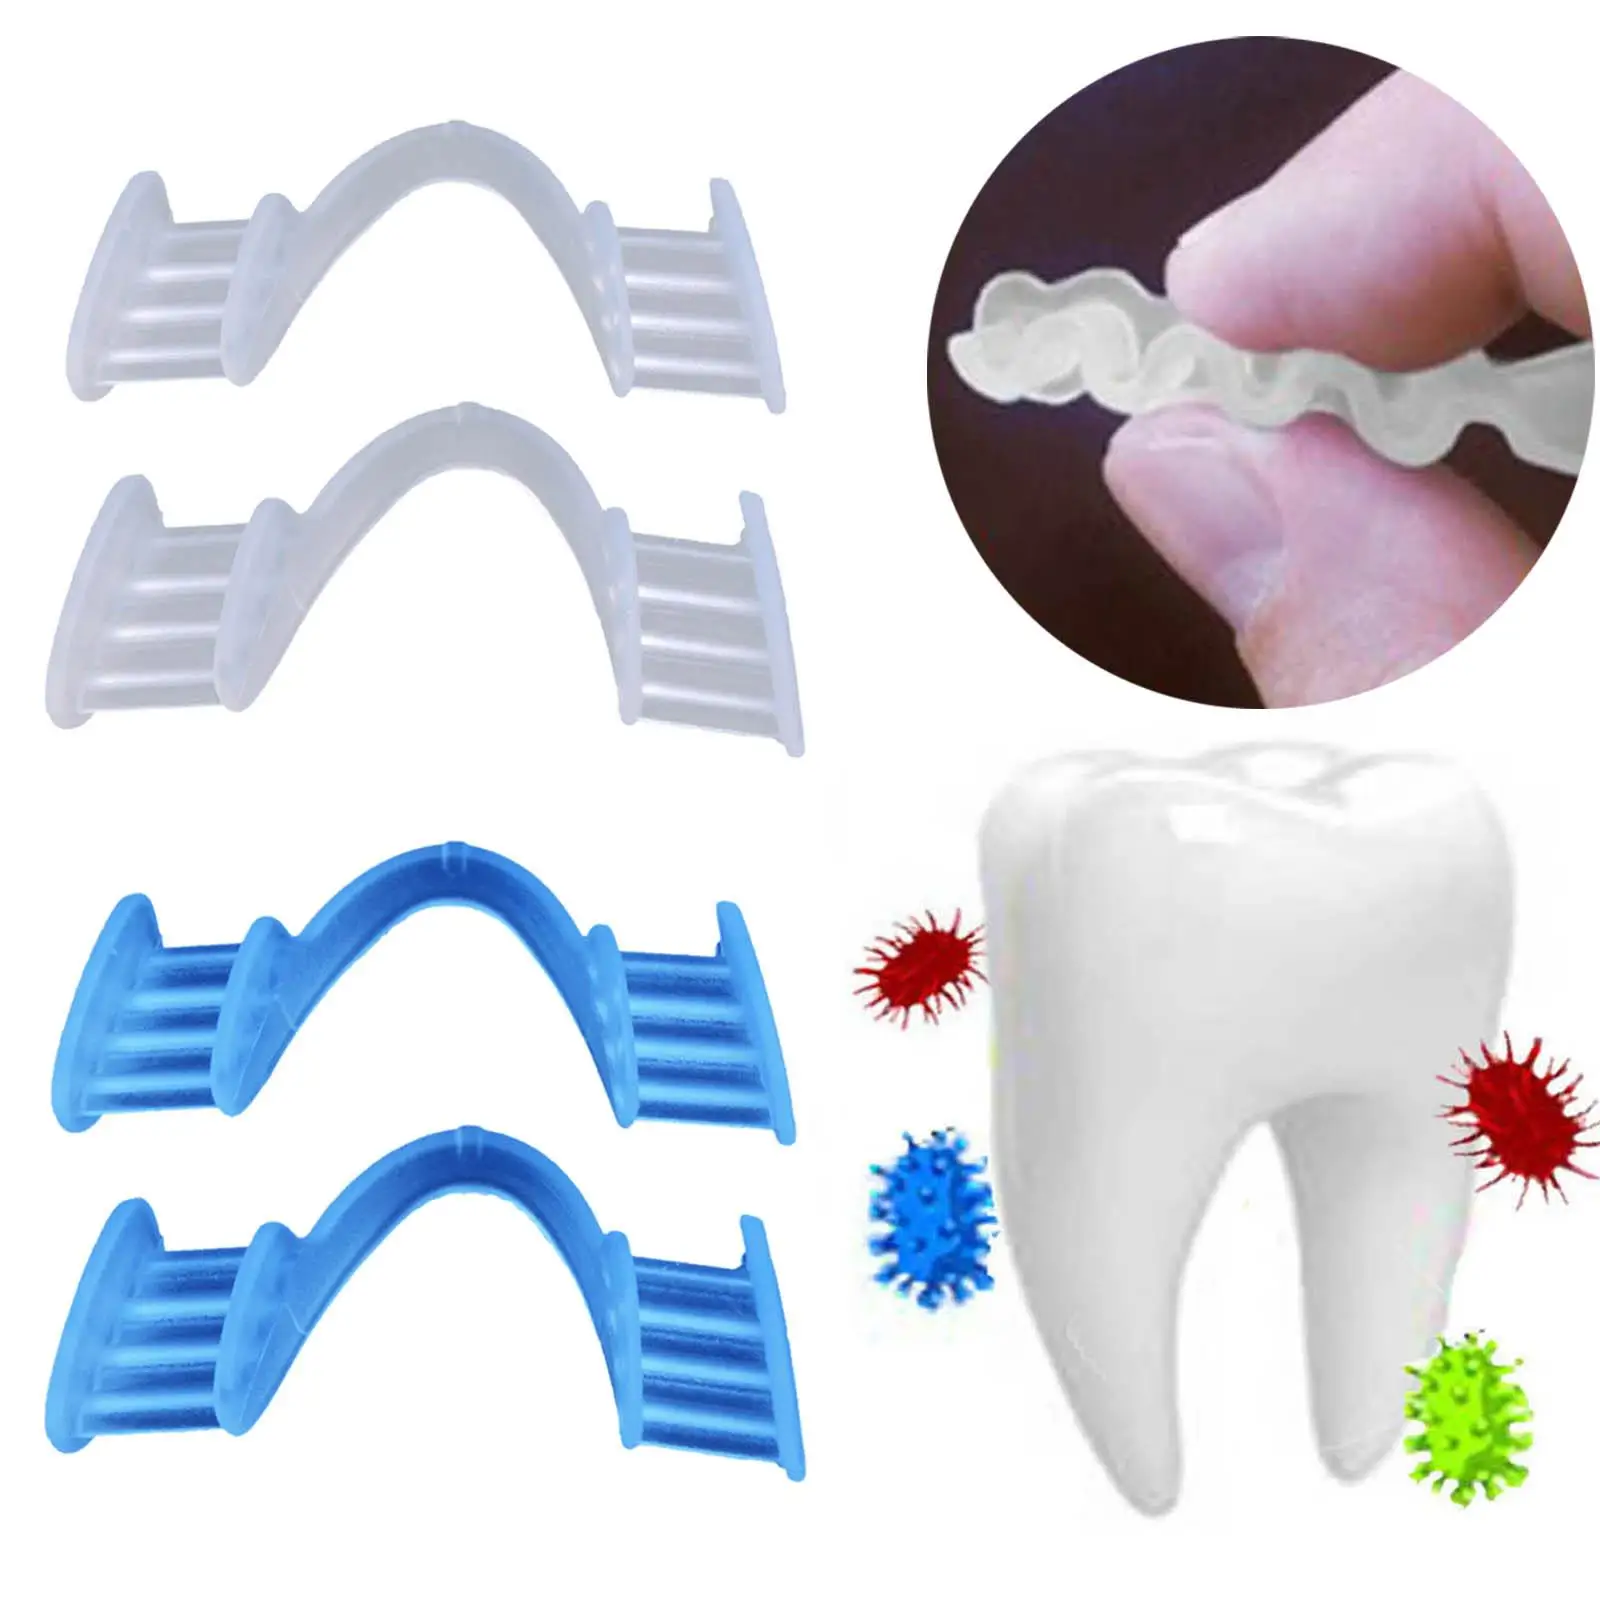 2x Silicone Night Mouth Guard Prevent Clenching Comfortable for Night Sleep Tooth Protector Tooth Guard for Teeth Grind